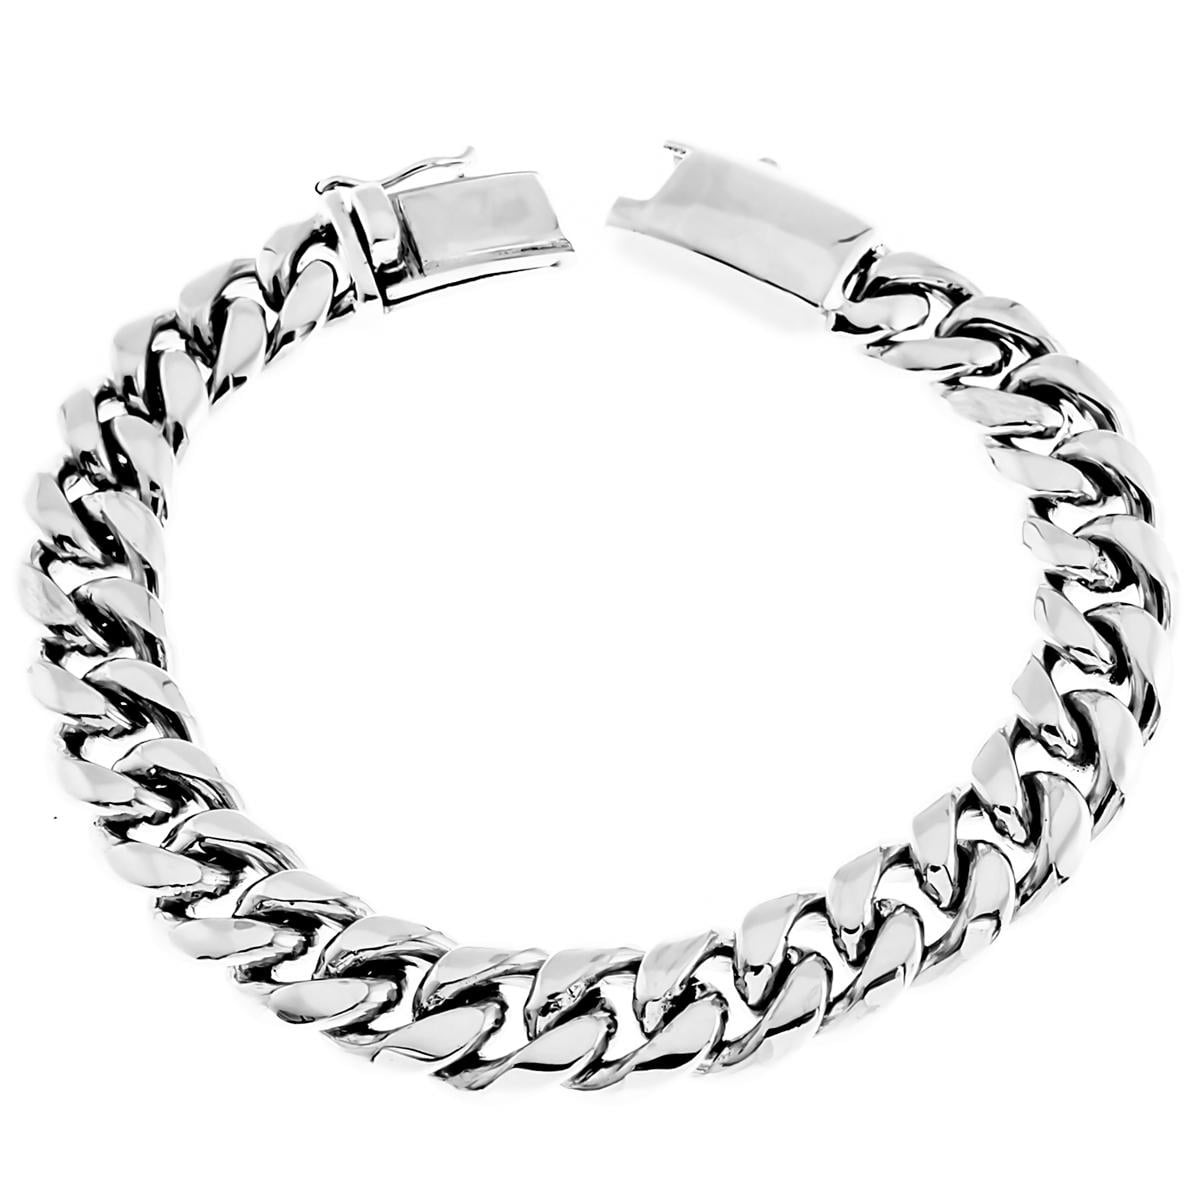 Buy Mens Heavy 925 Sterling Silver 7.5mm Curb Chain Bracelet 8.5 Hallmarked  29.5gr Online in India - Etsy